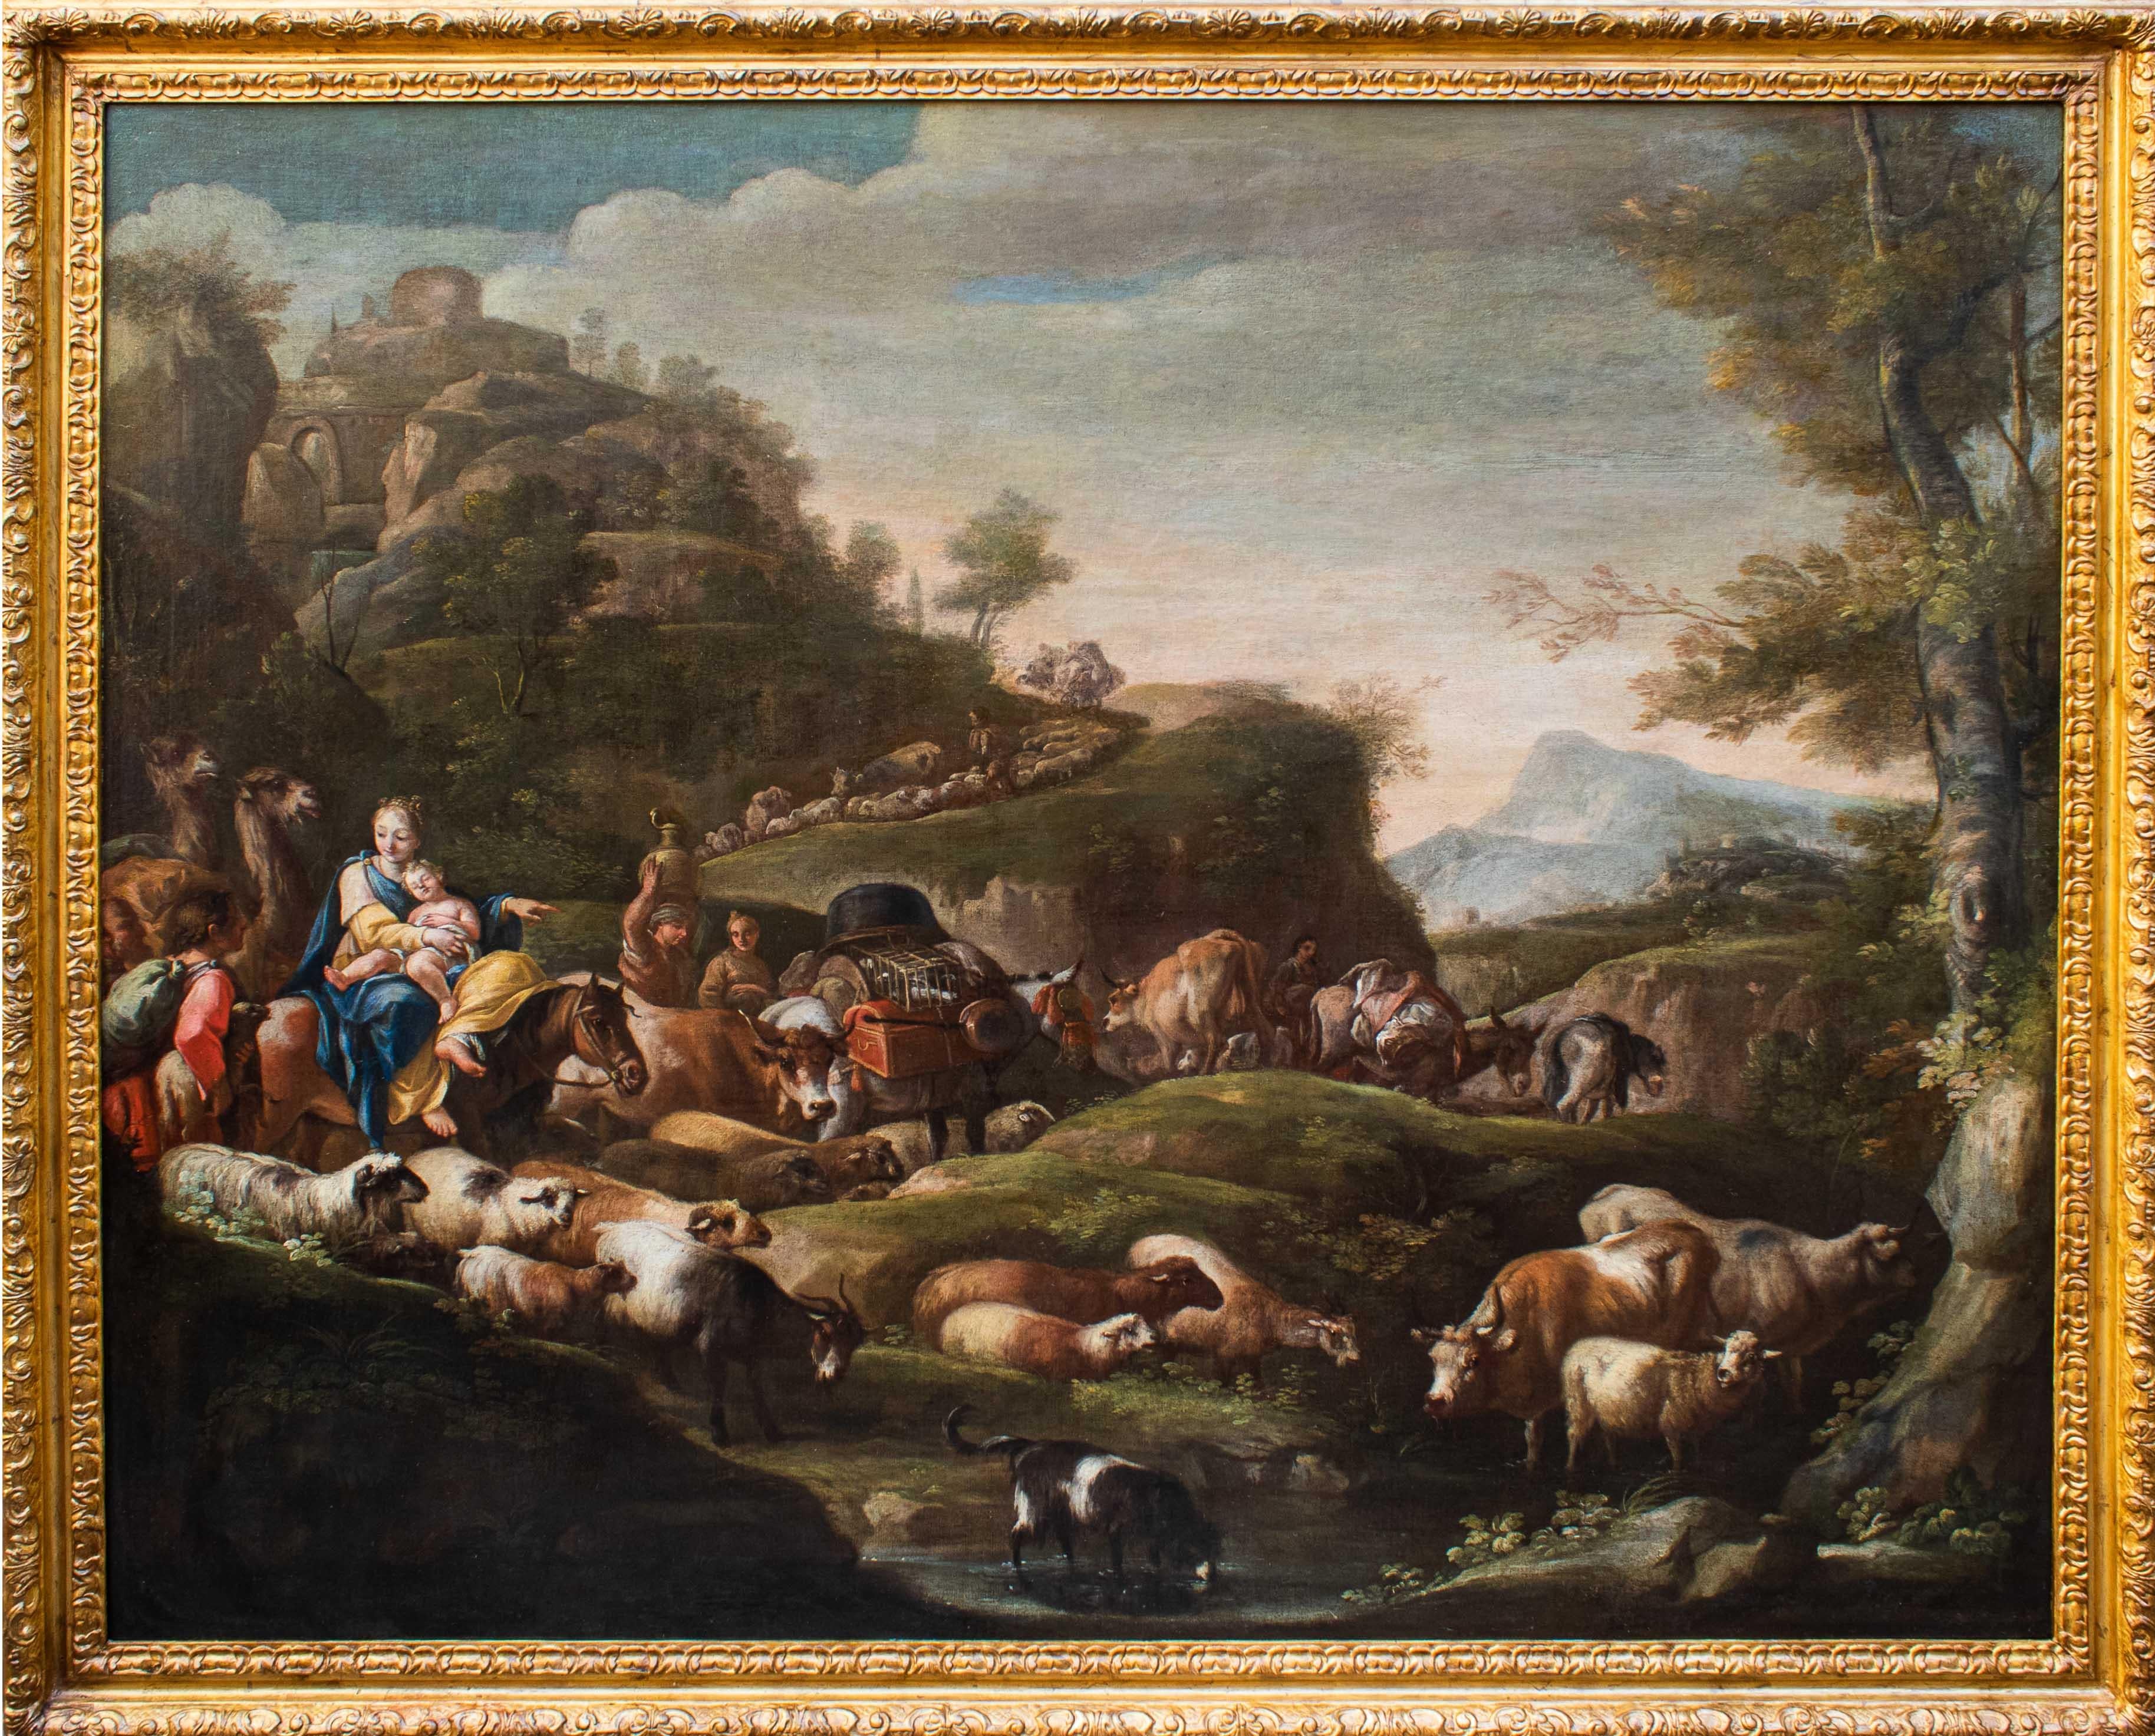 Giuseppe Tassone (Rome 1653 - Naples 1737)

Shepherd's Caravan

Oil on canvas, 130 x 155 cm 

Expert opinion Prof. Alberto Crispo

The manner of outlining the people and animals with precise, soft drafting in delicate, warm tones and comparison with